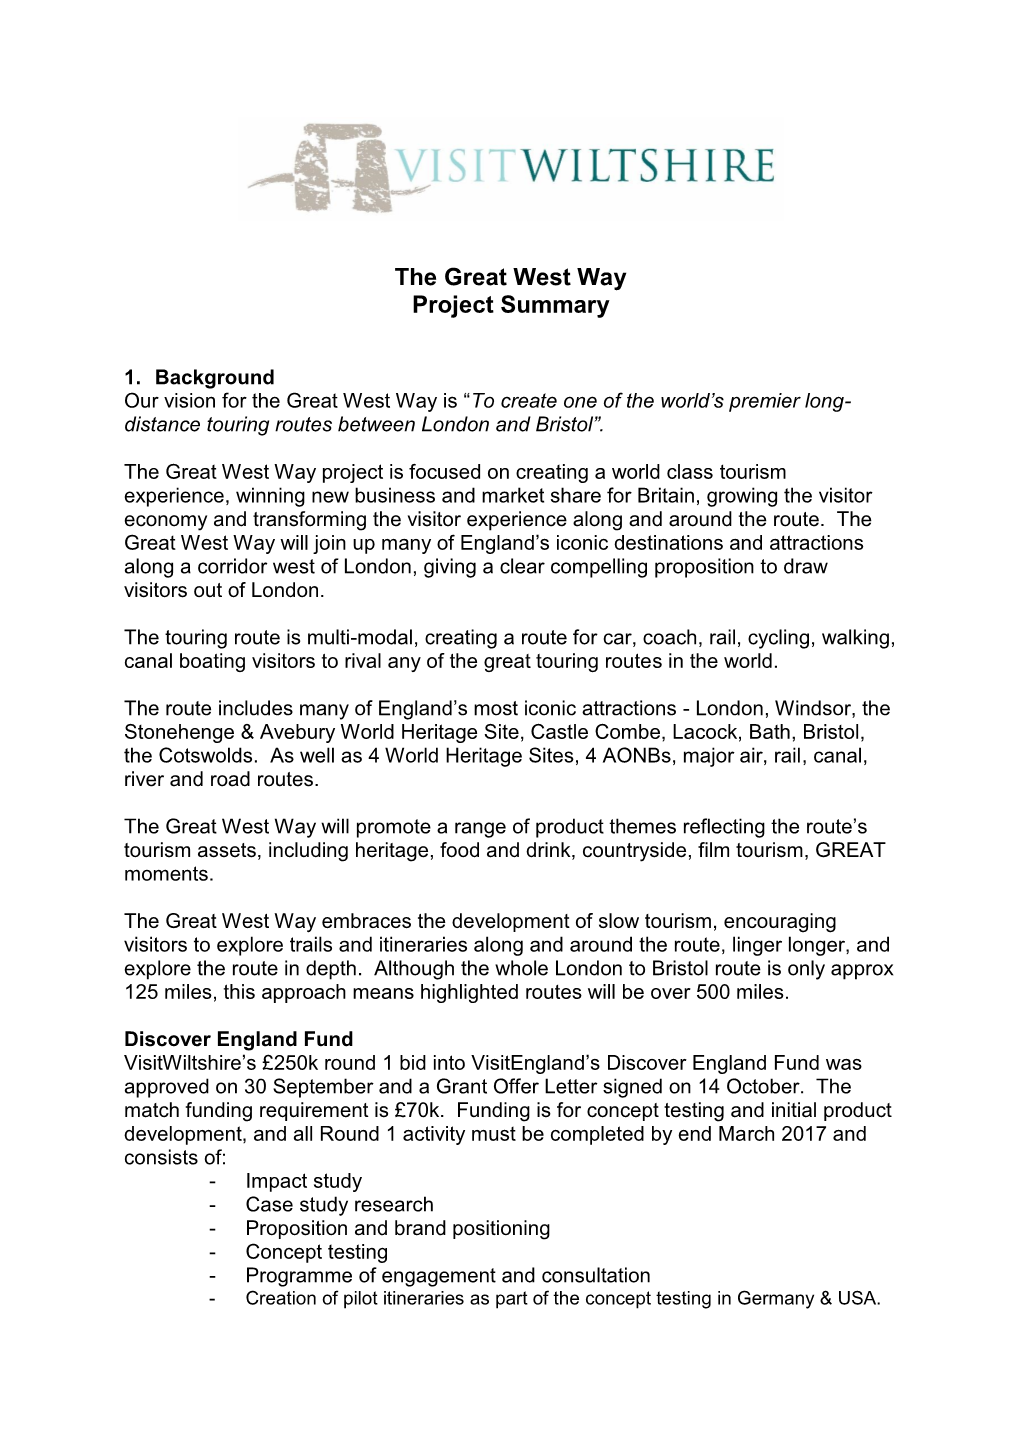 The Great West Way Project Summary